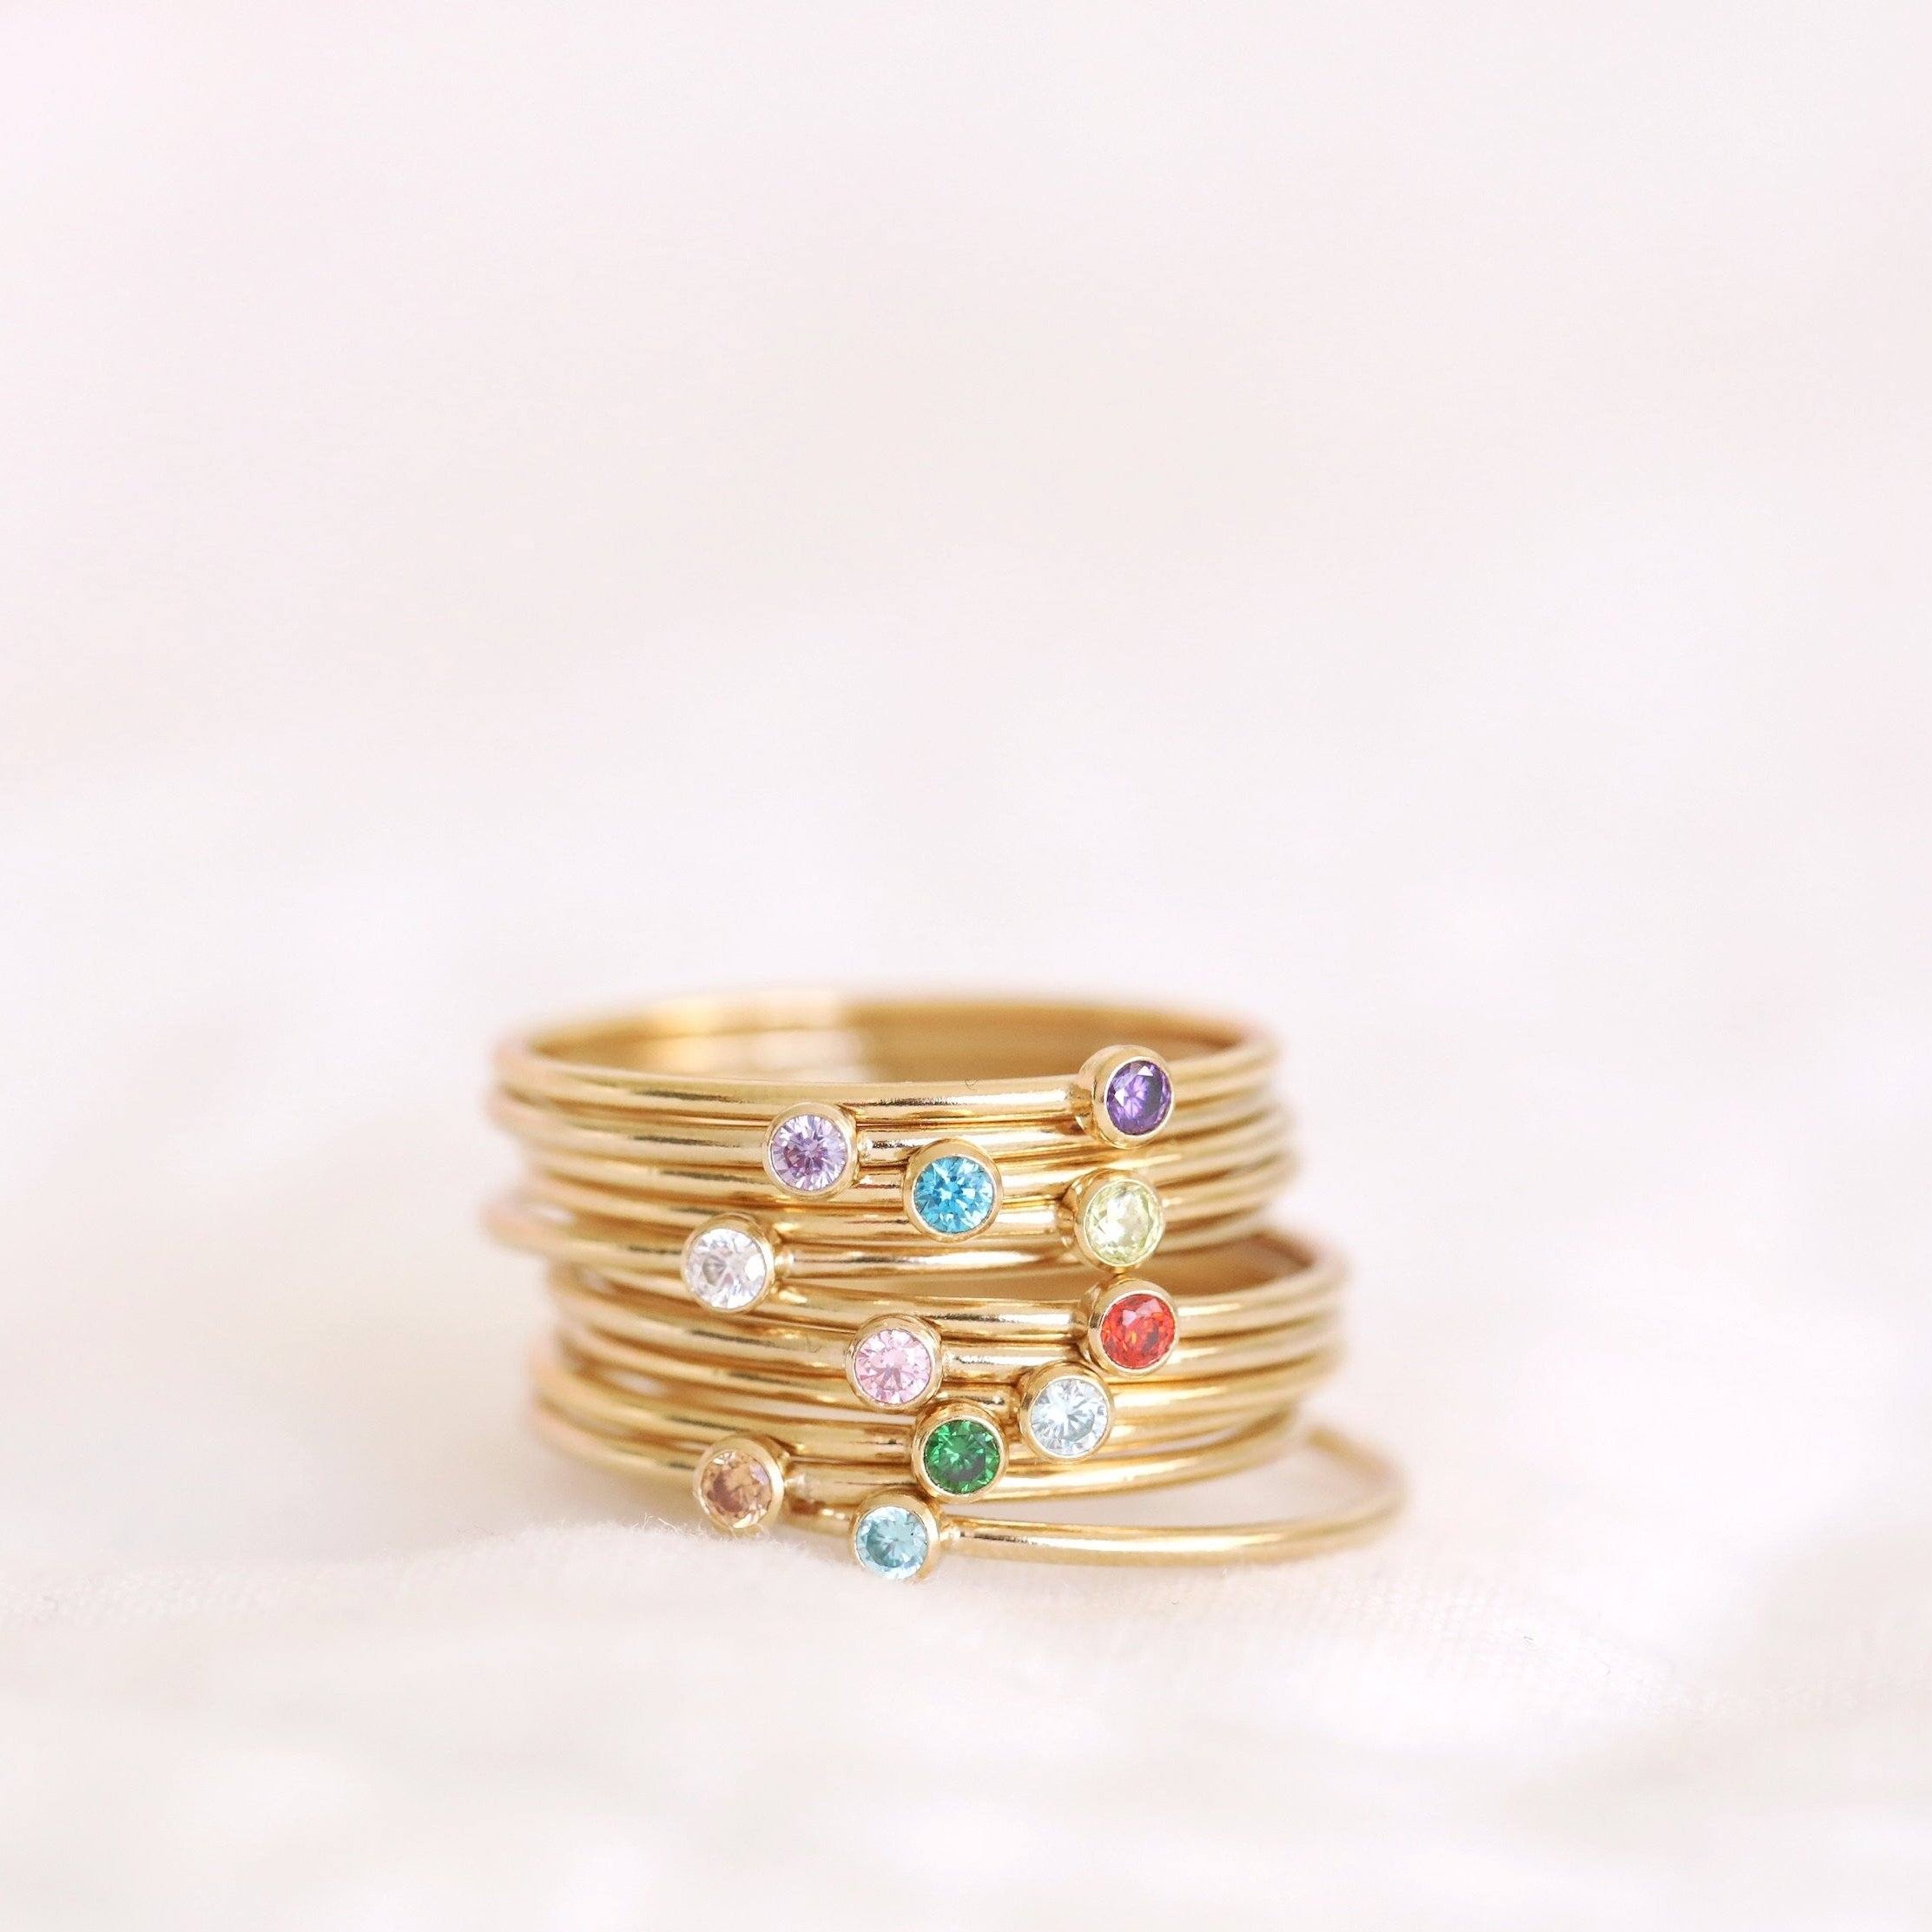 Handmade sterling silver and gold gilled birthstone rings sustainably made in Canada